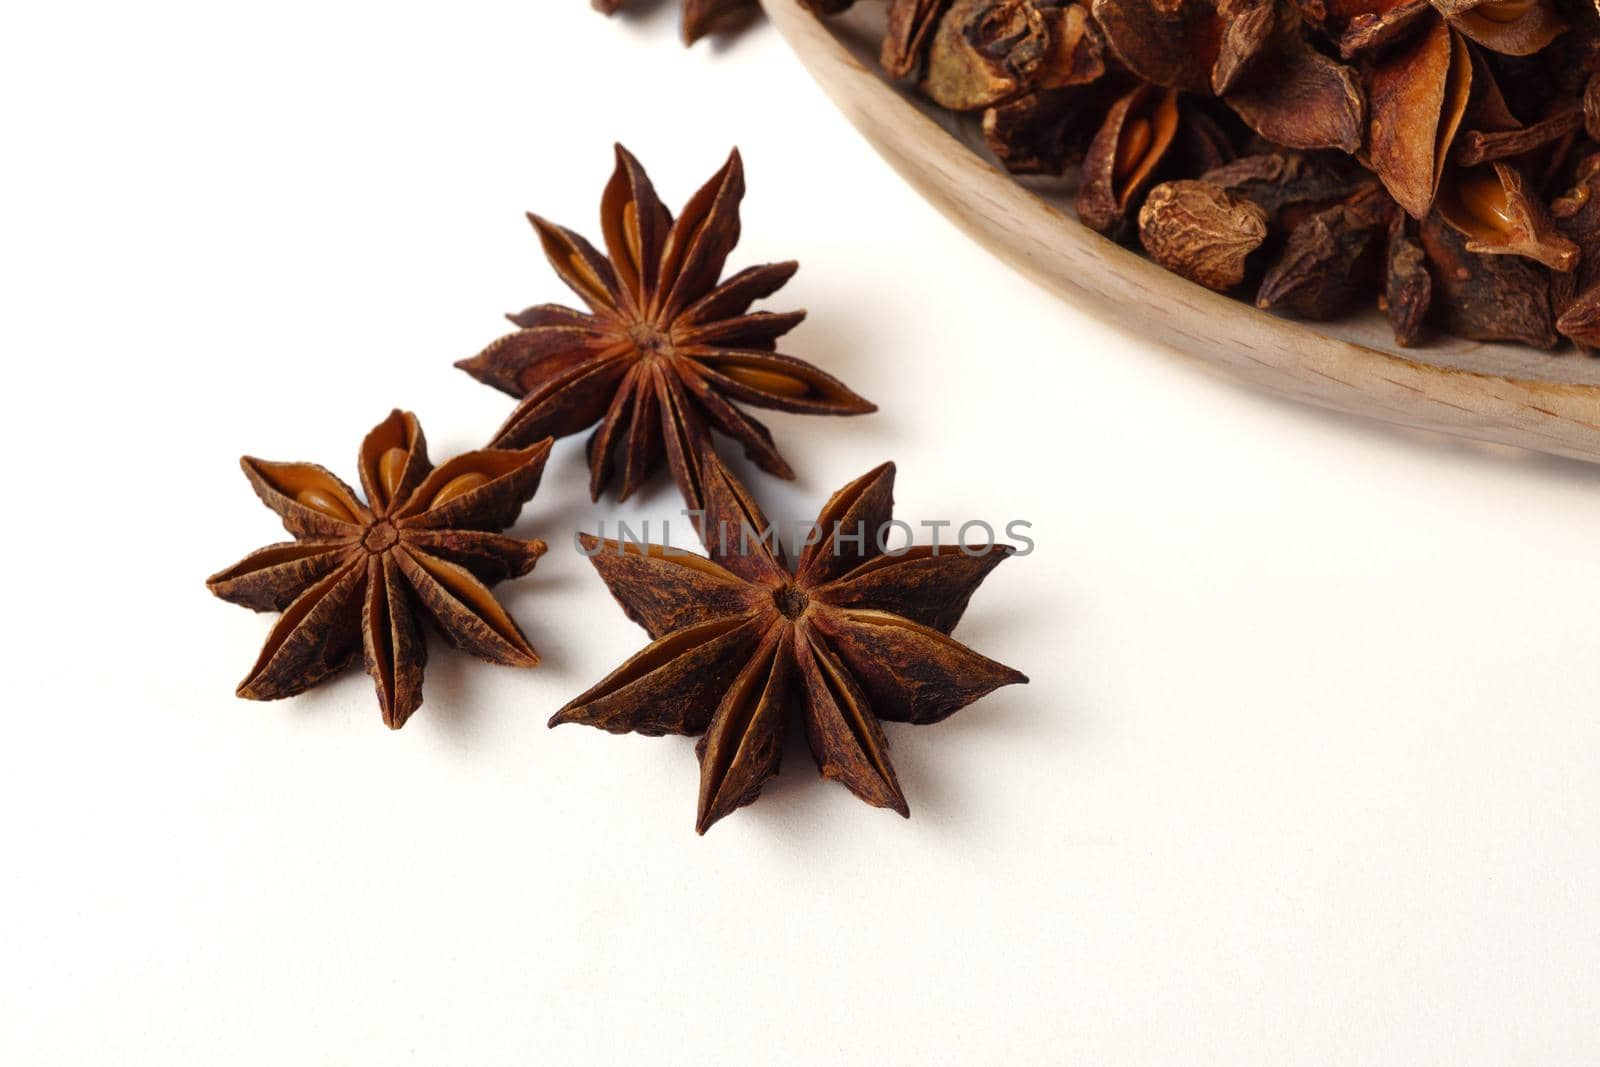 star anise illicium verum in a wooden spoon isolated on white background by joseantona